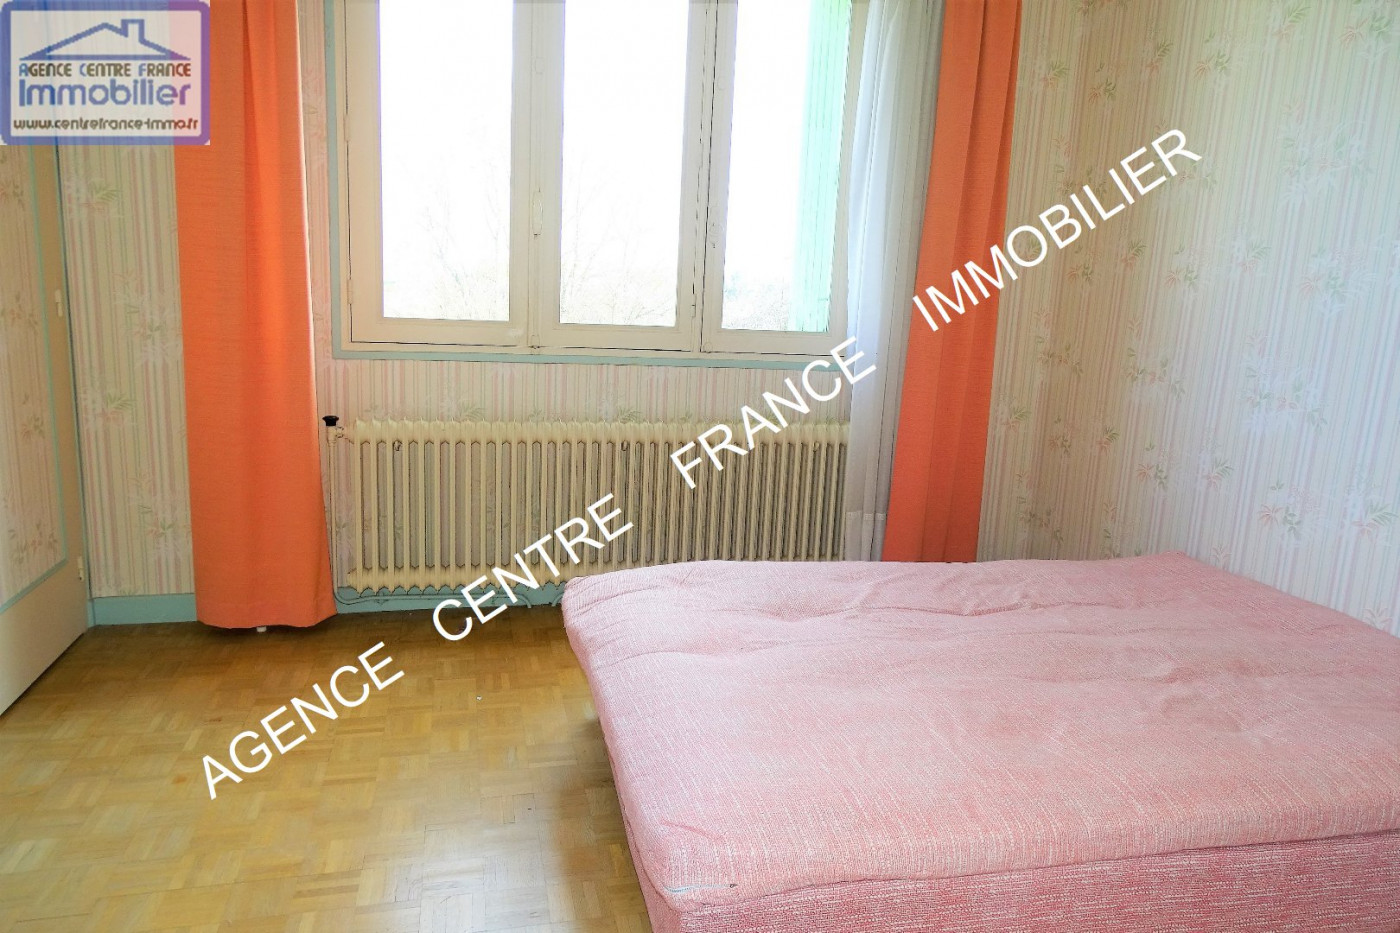 For sale  Bourges | Réf 030011536 - Agence centre france immobilier